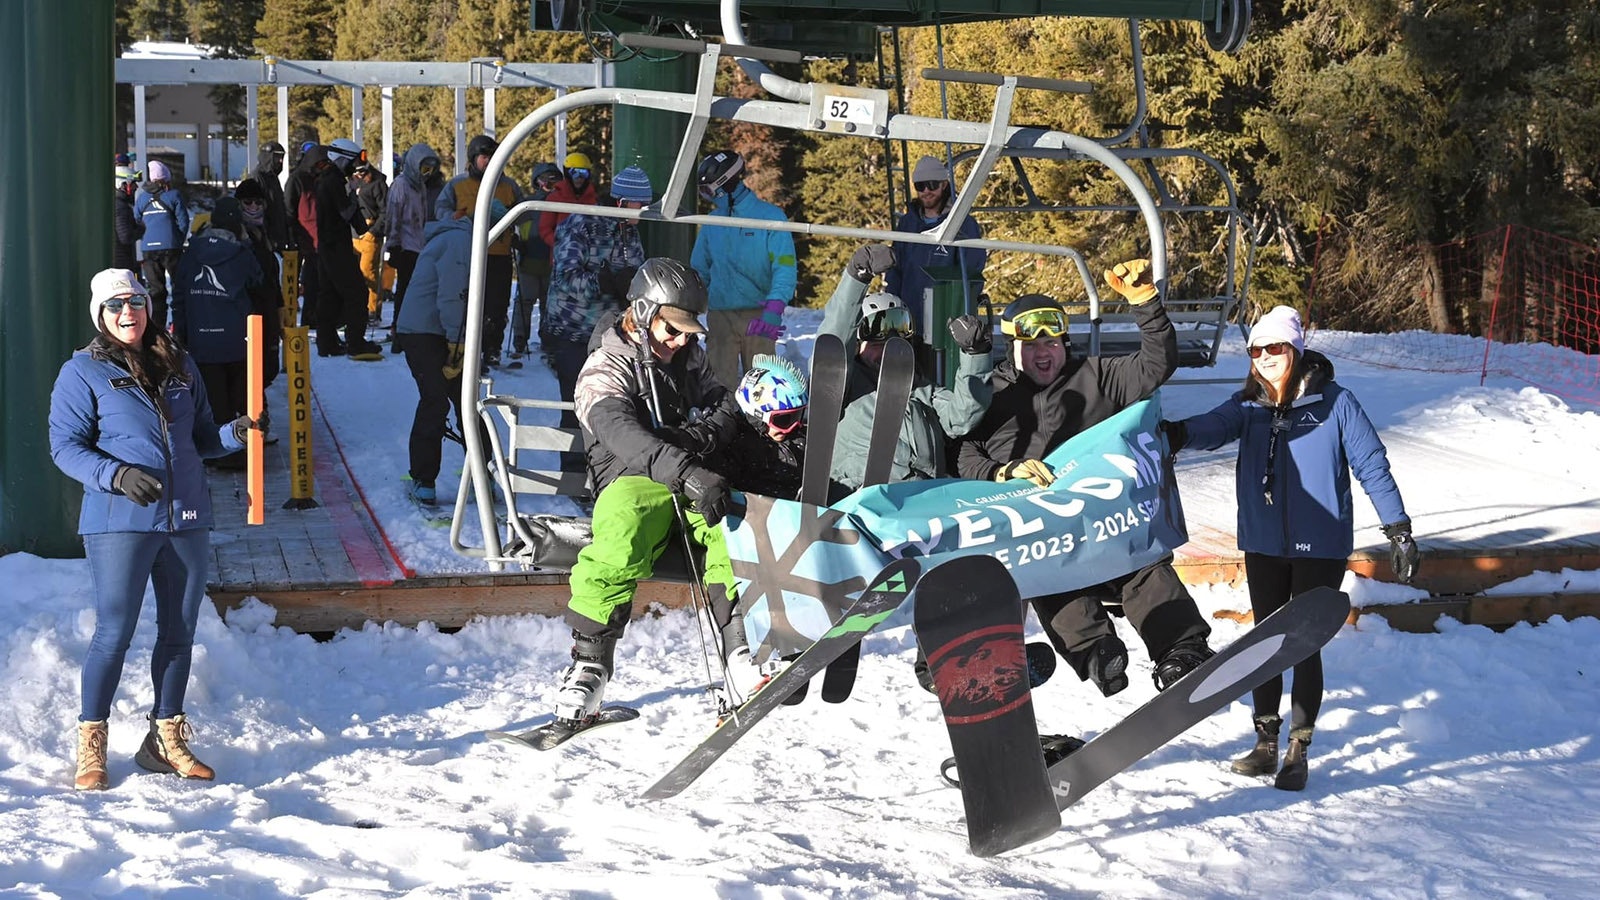 The first lift of skiers is welcomed at the top of the run at Grand Targhee last weekend.